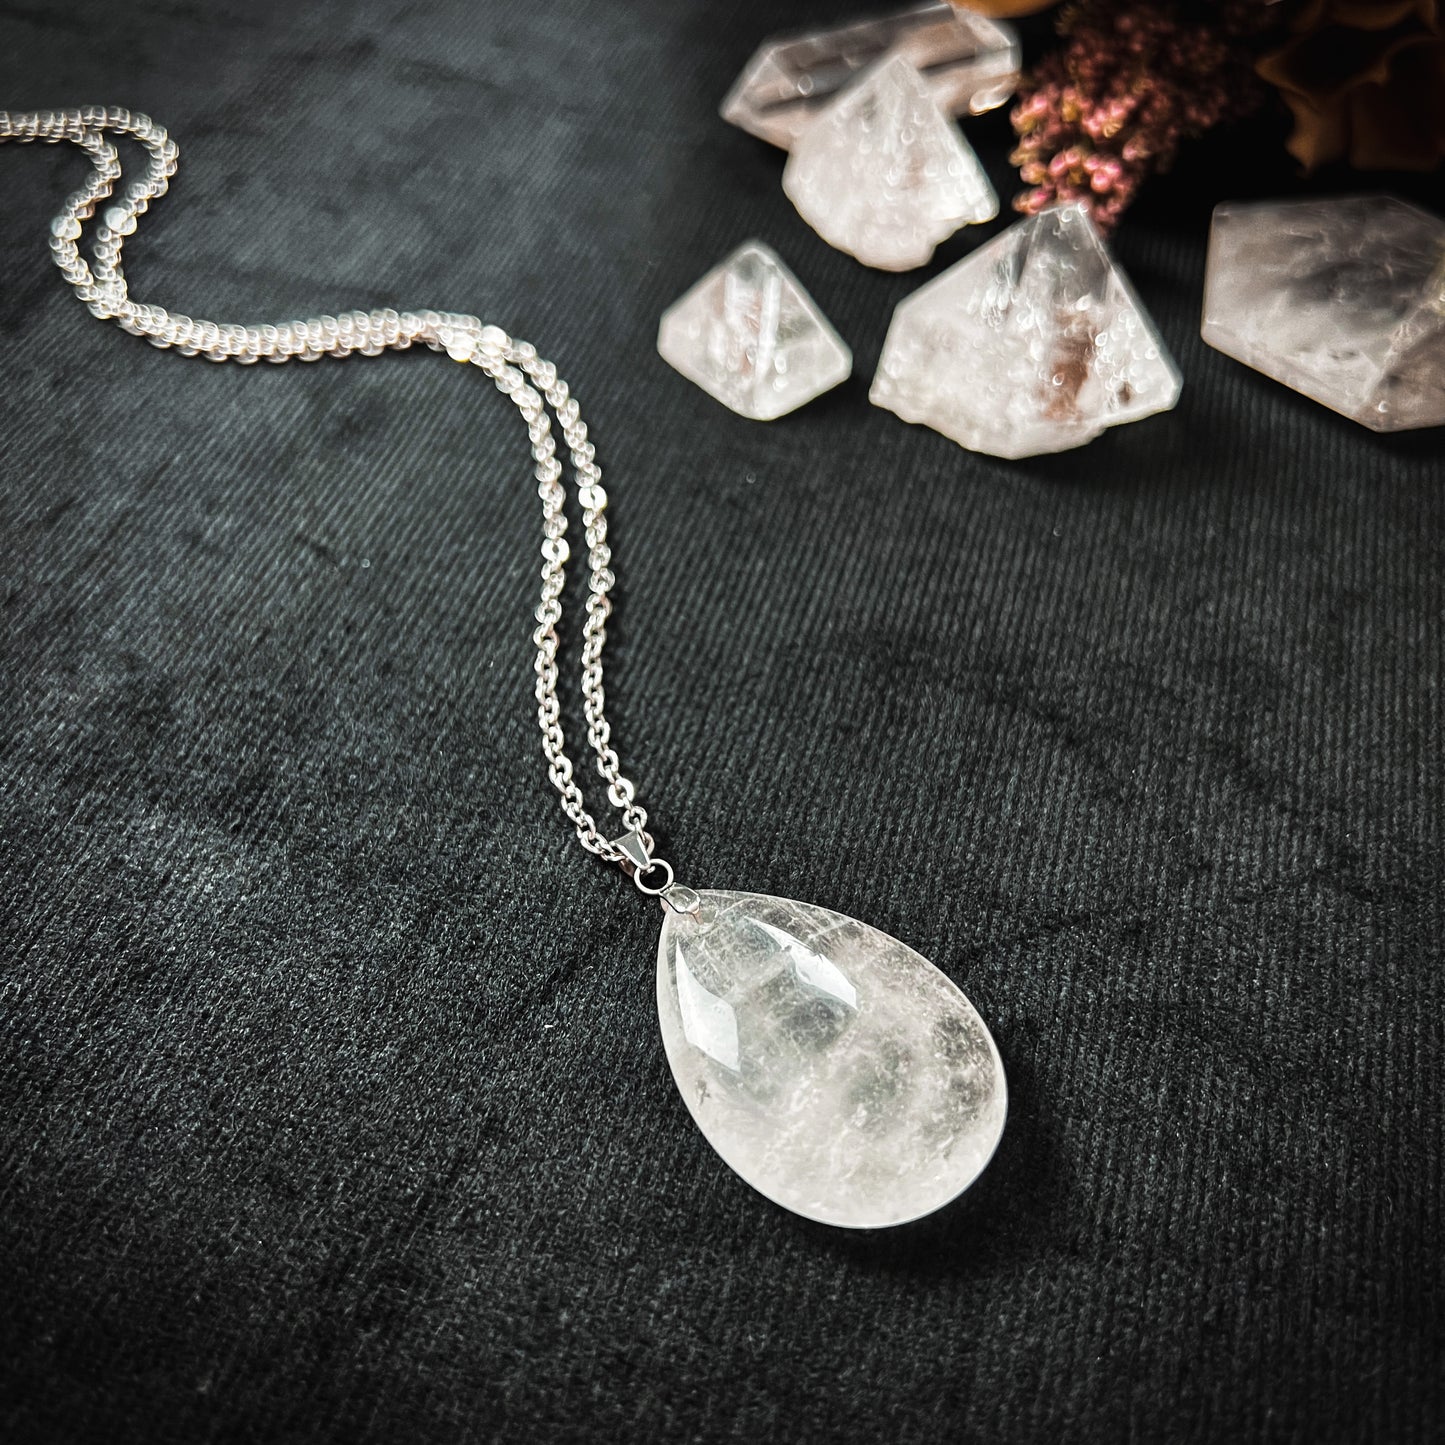 Clear quartz stainless steel pendant necklace - The French Witch shop